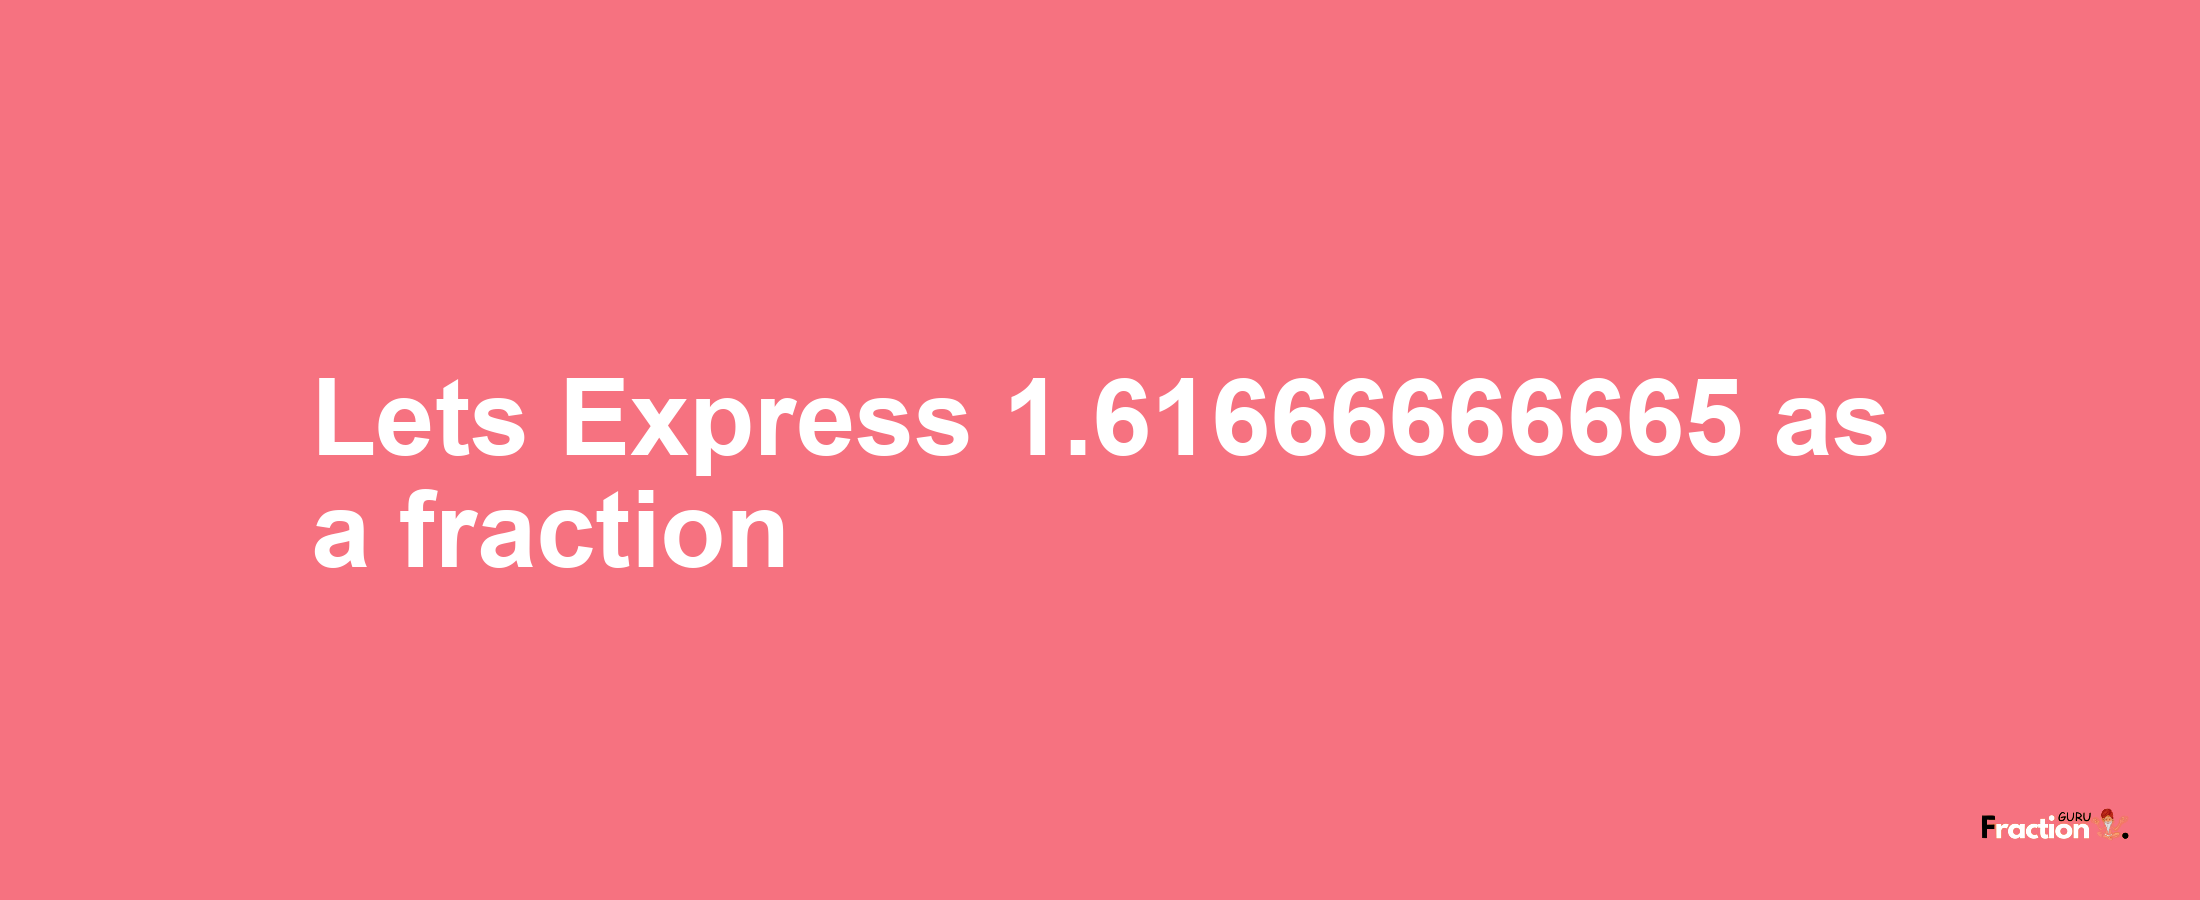 Lets Express 1.61666666665 as afraction